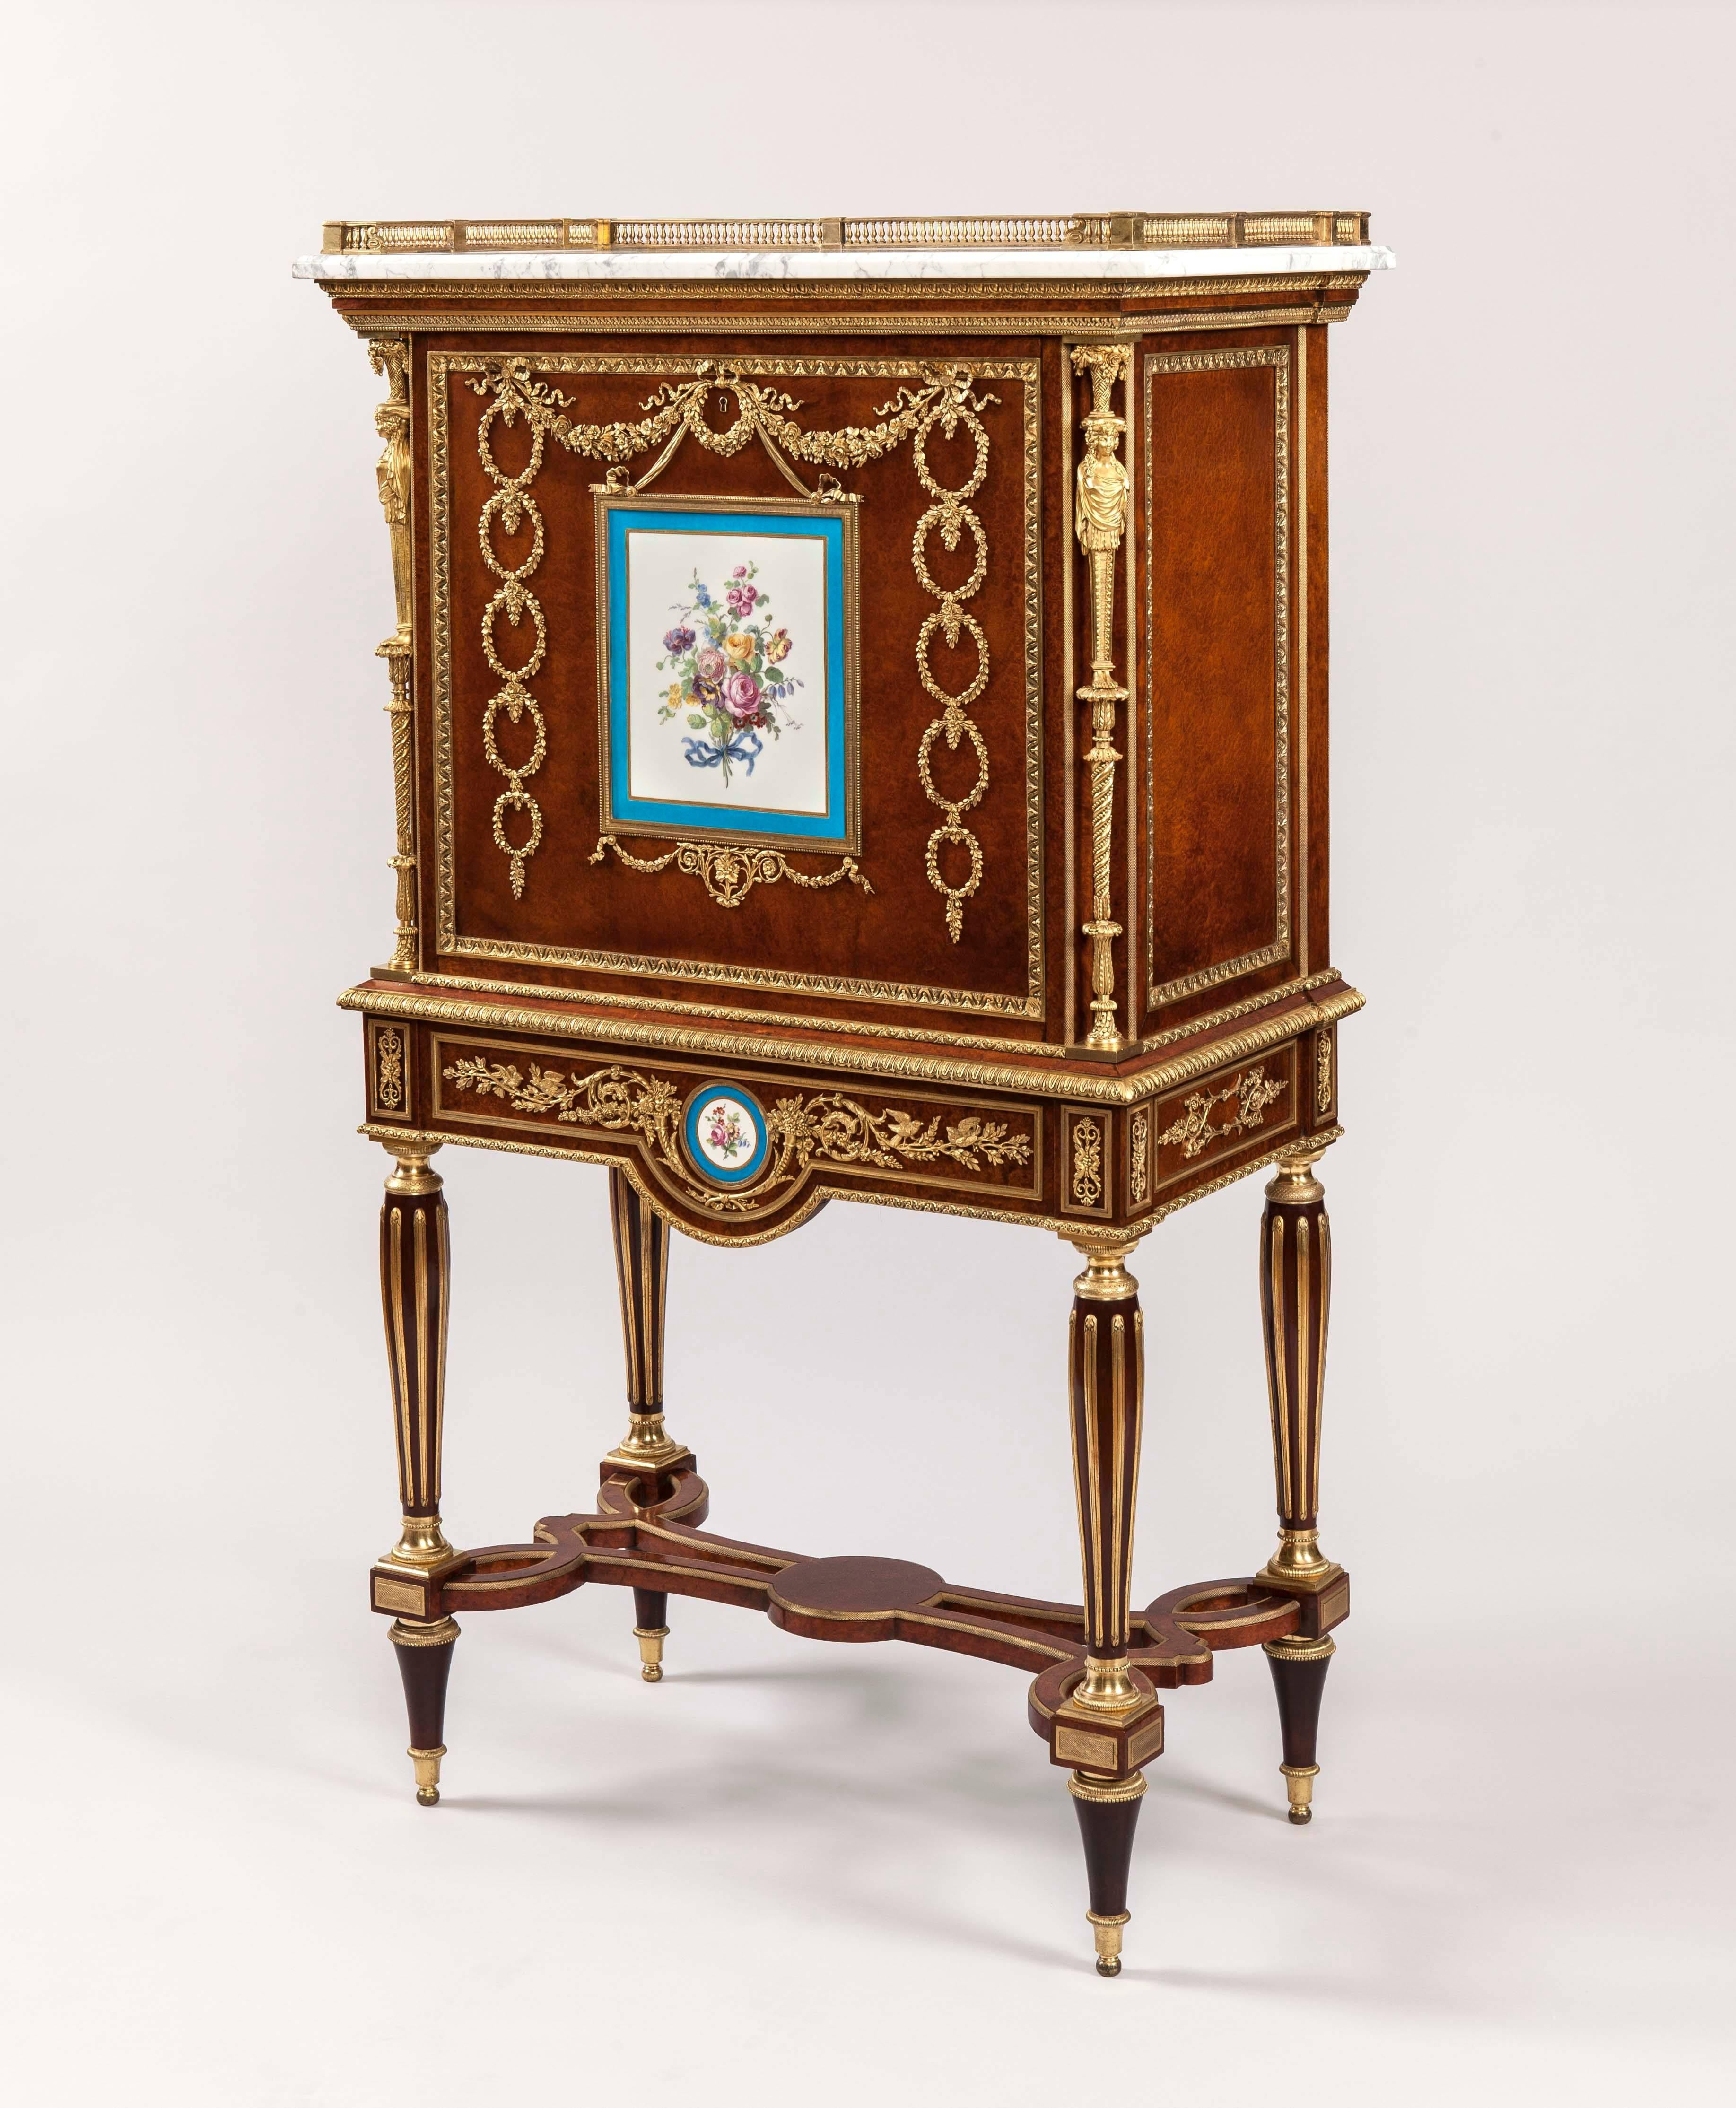 Inlay 19th Century French Secretaire with Ormolu and Sevres Porcelain Plaques